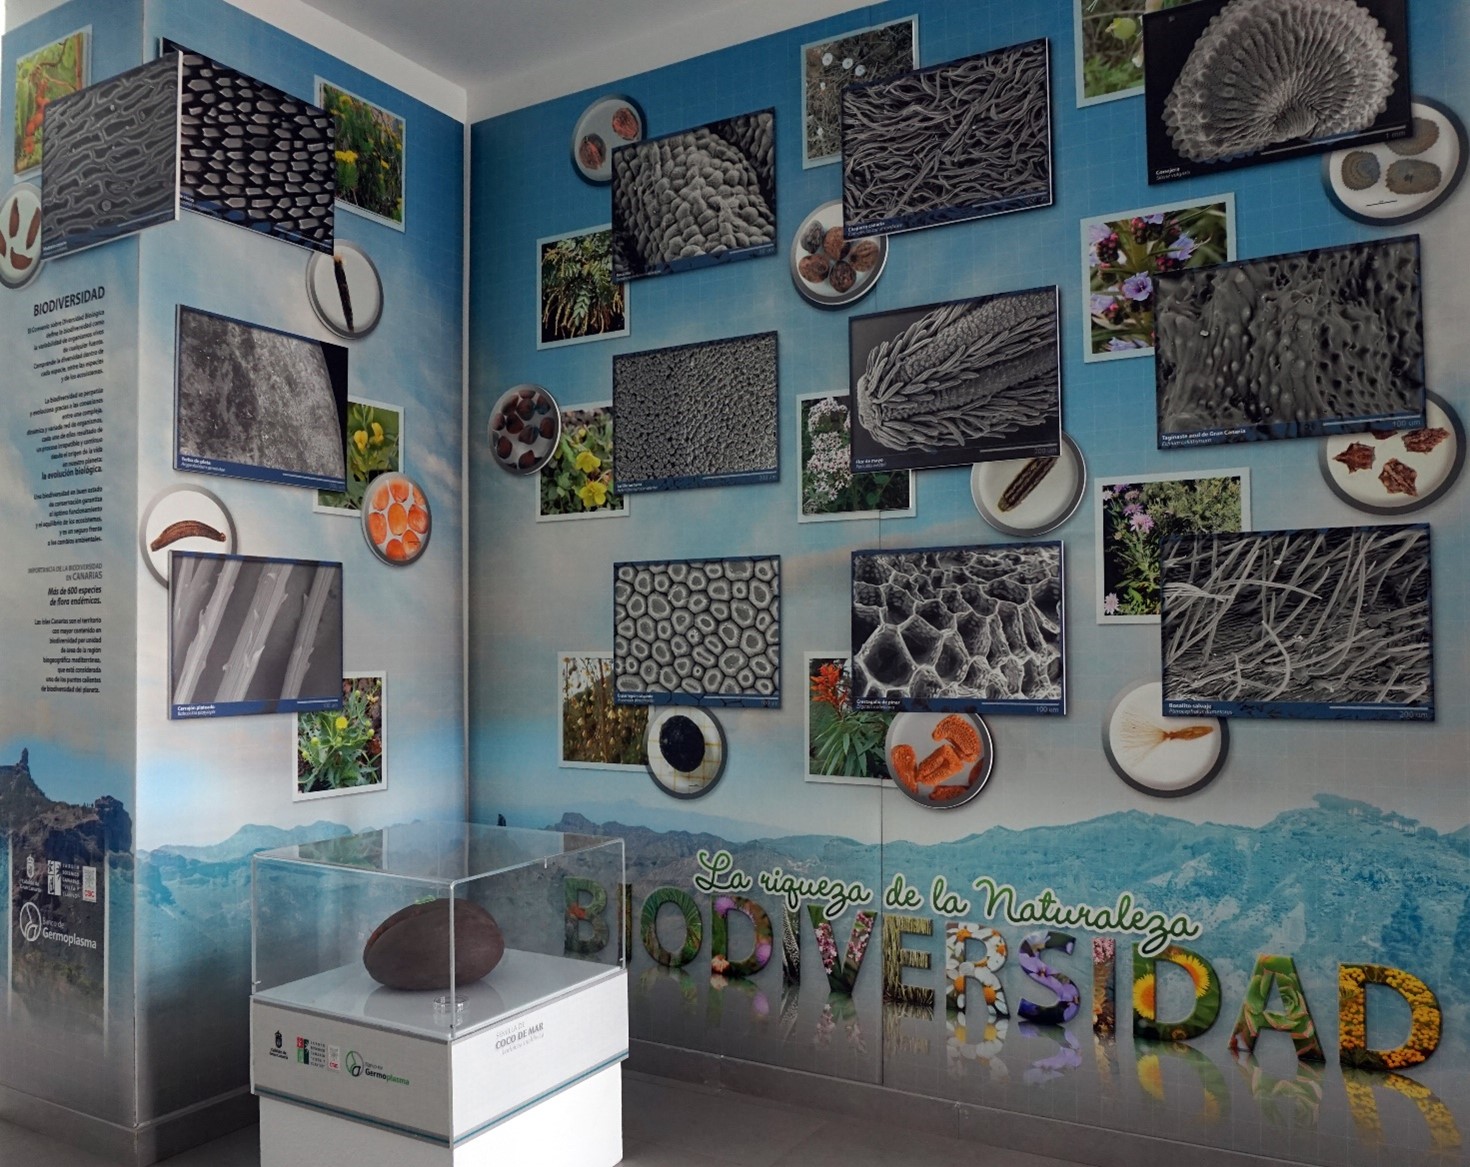 A wall of the exhibition with the phrase La rigueza de la Naturaleza biodiversidad. The wall is covered in pictures of different species seeds at different scales, from on the plant to the individual seeds and then the seeds photographed under an SEM microscope. Infront of the display panel is a glass cabinet with a double coconut in.